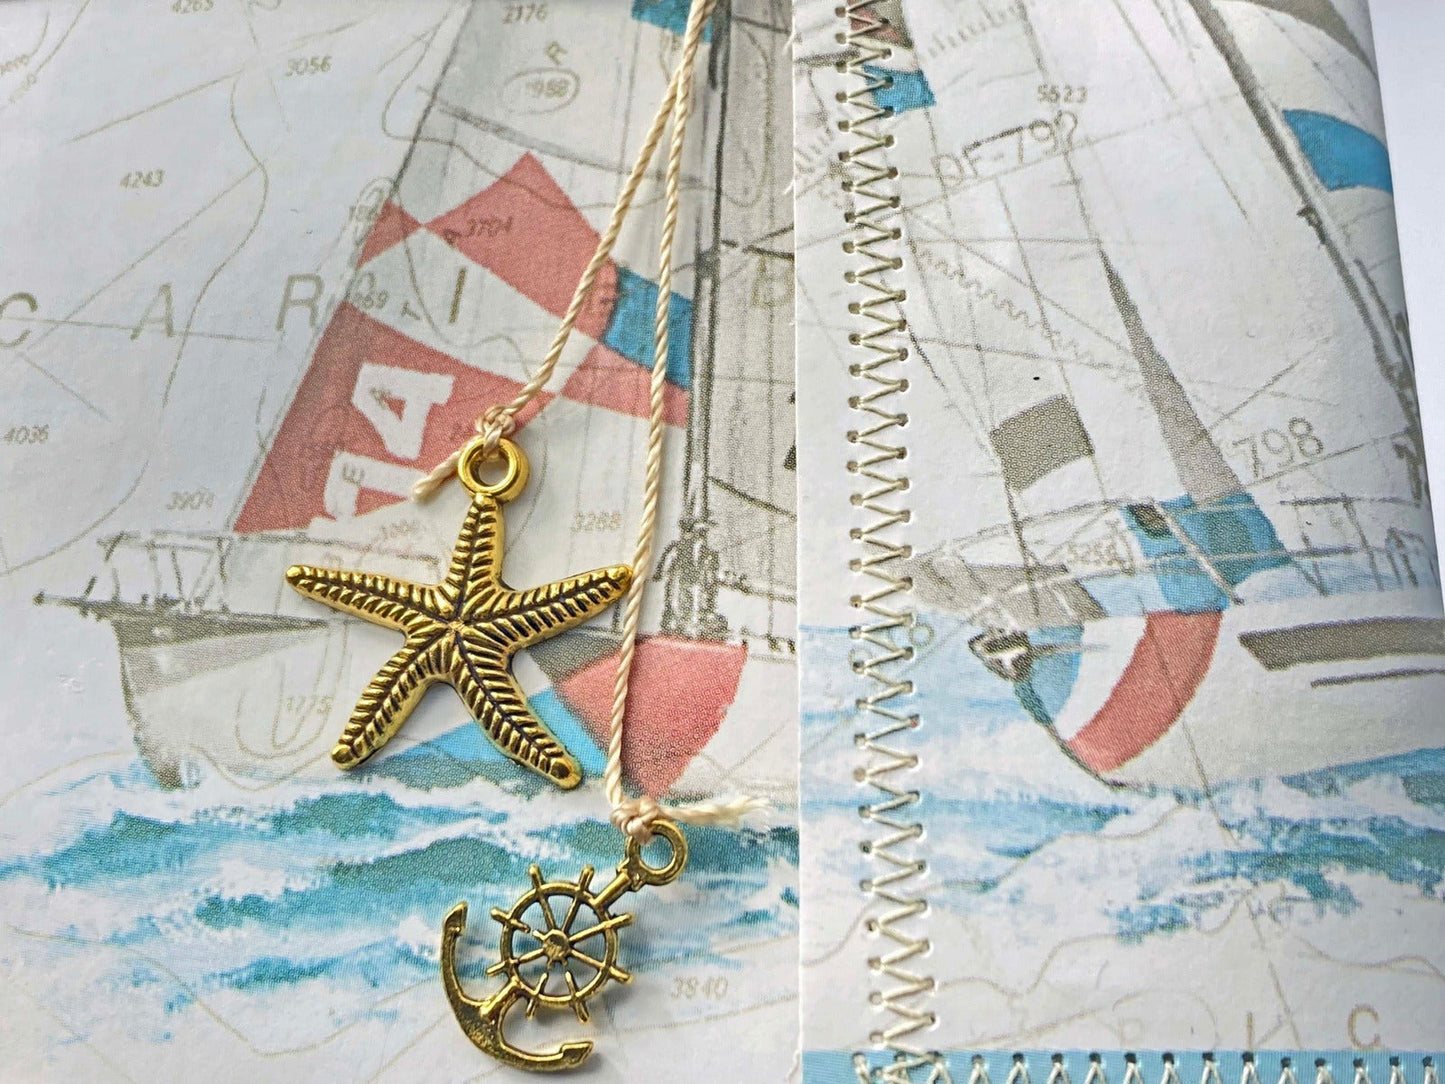 Nautical Theme, Soft Cover Handmade Junk Journal, Travel Journal, Wallet Style, Fits in your Purse